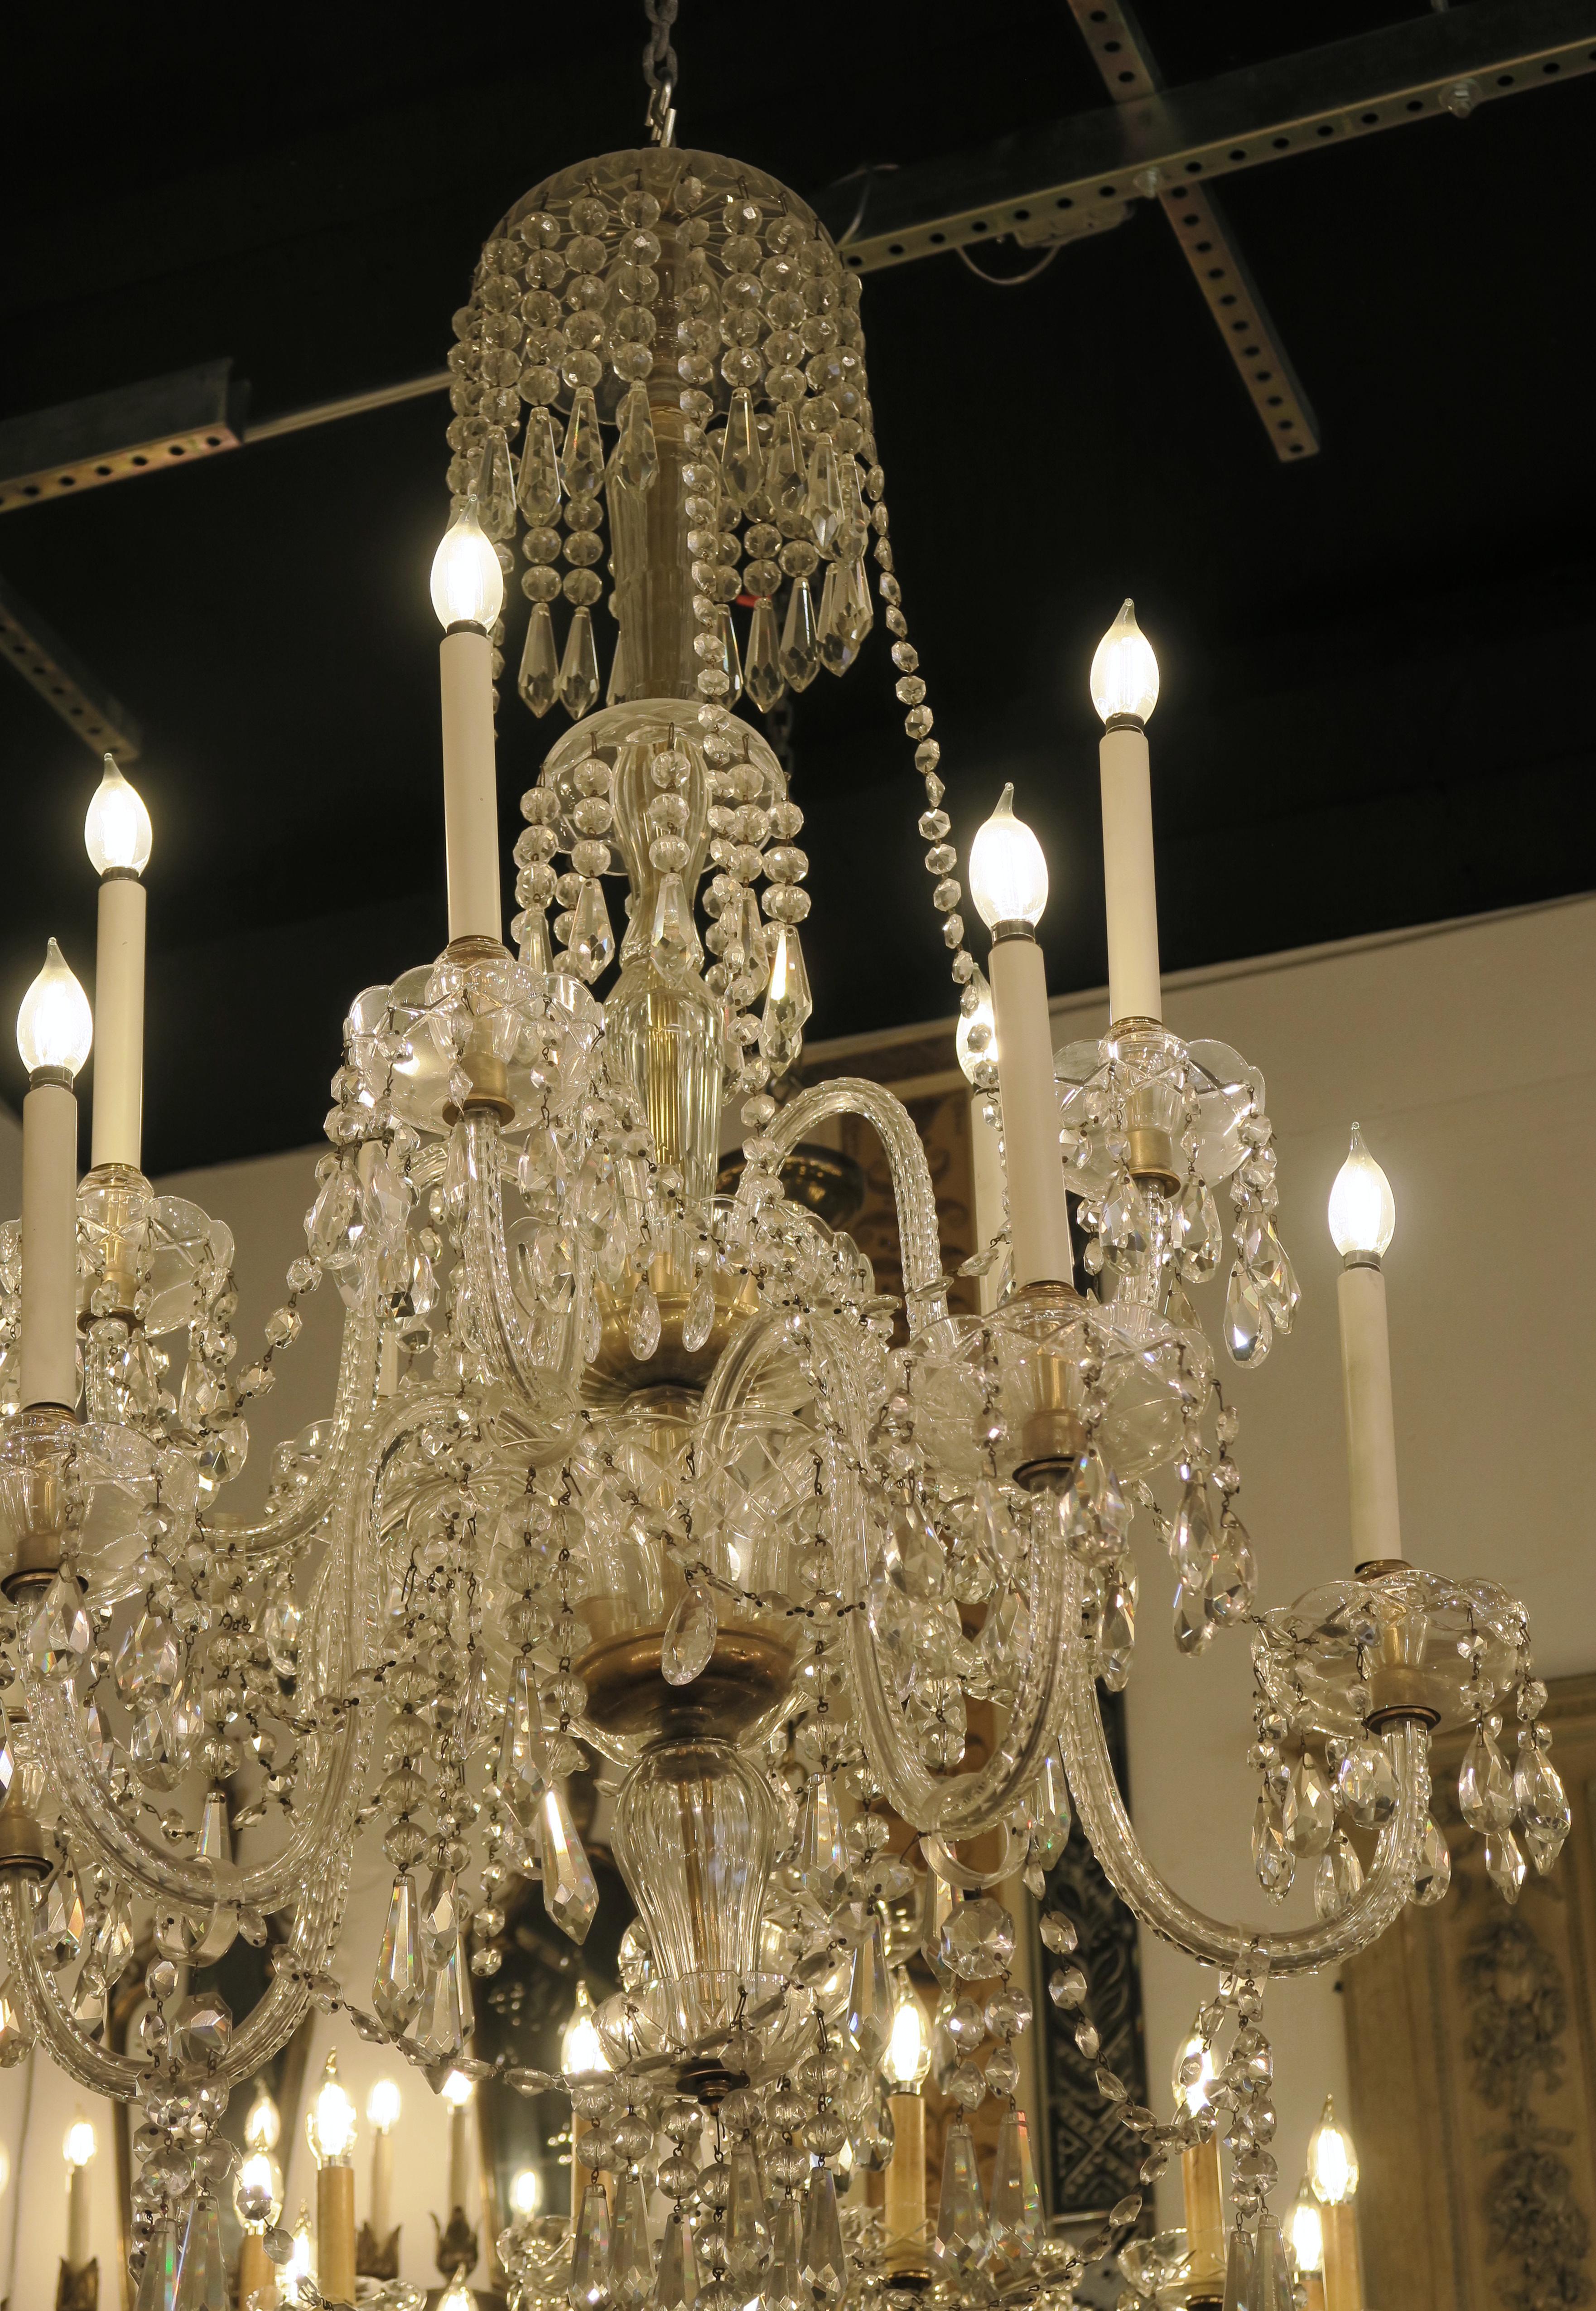 1940s gorgeous crystal chandelier with eight arms. Features an abundance of icicle crystals with brass details. This can be seen at our 2420 Broadway location on the upper west side in Manhattan.